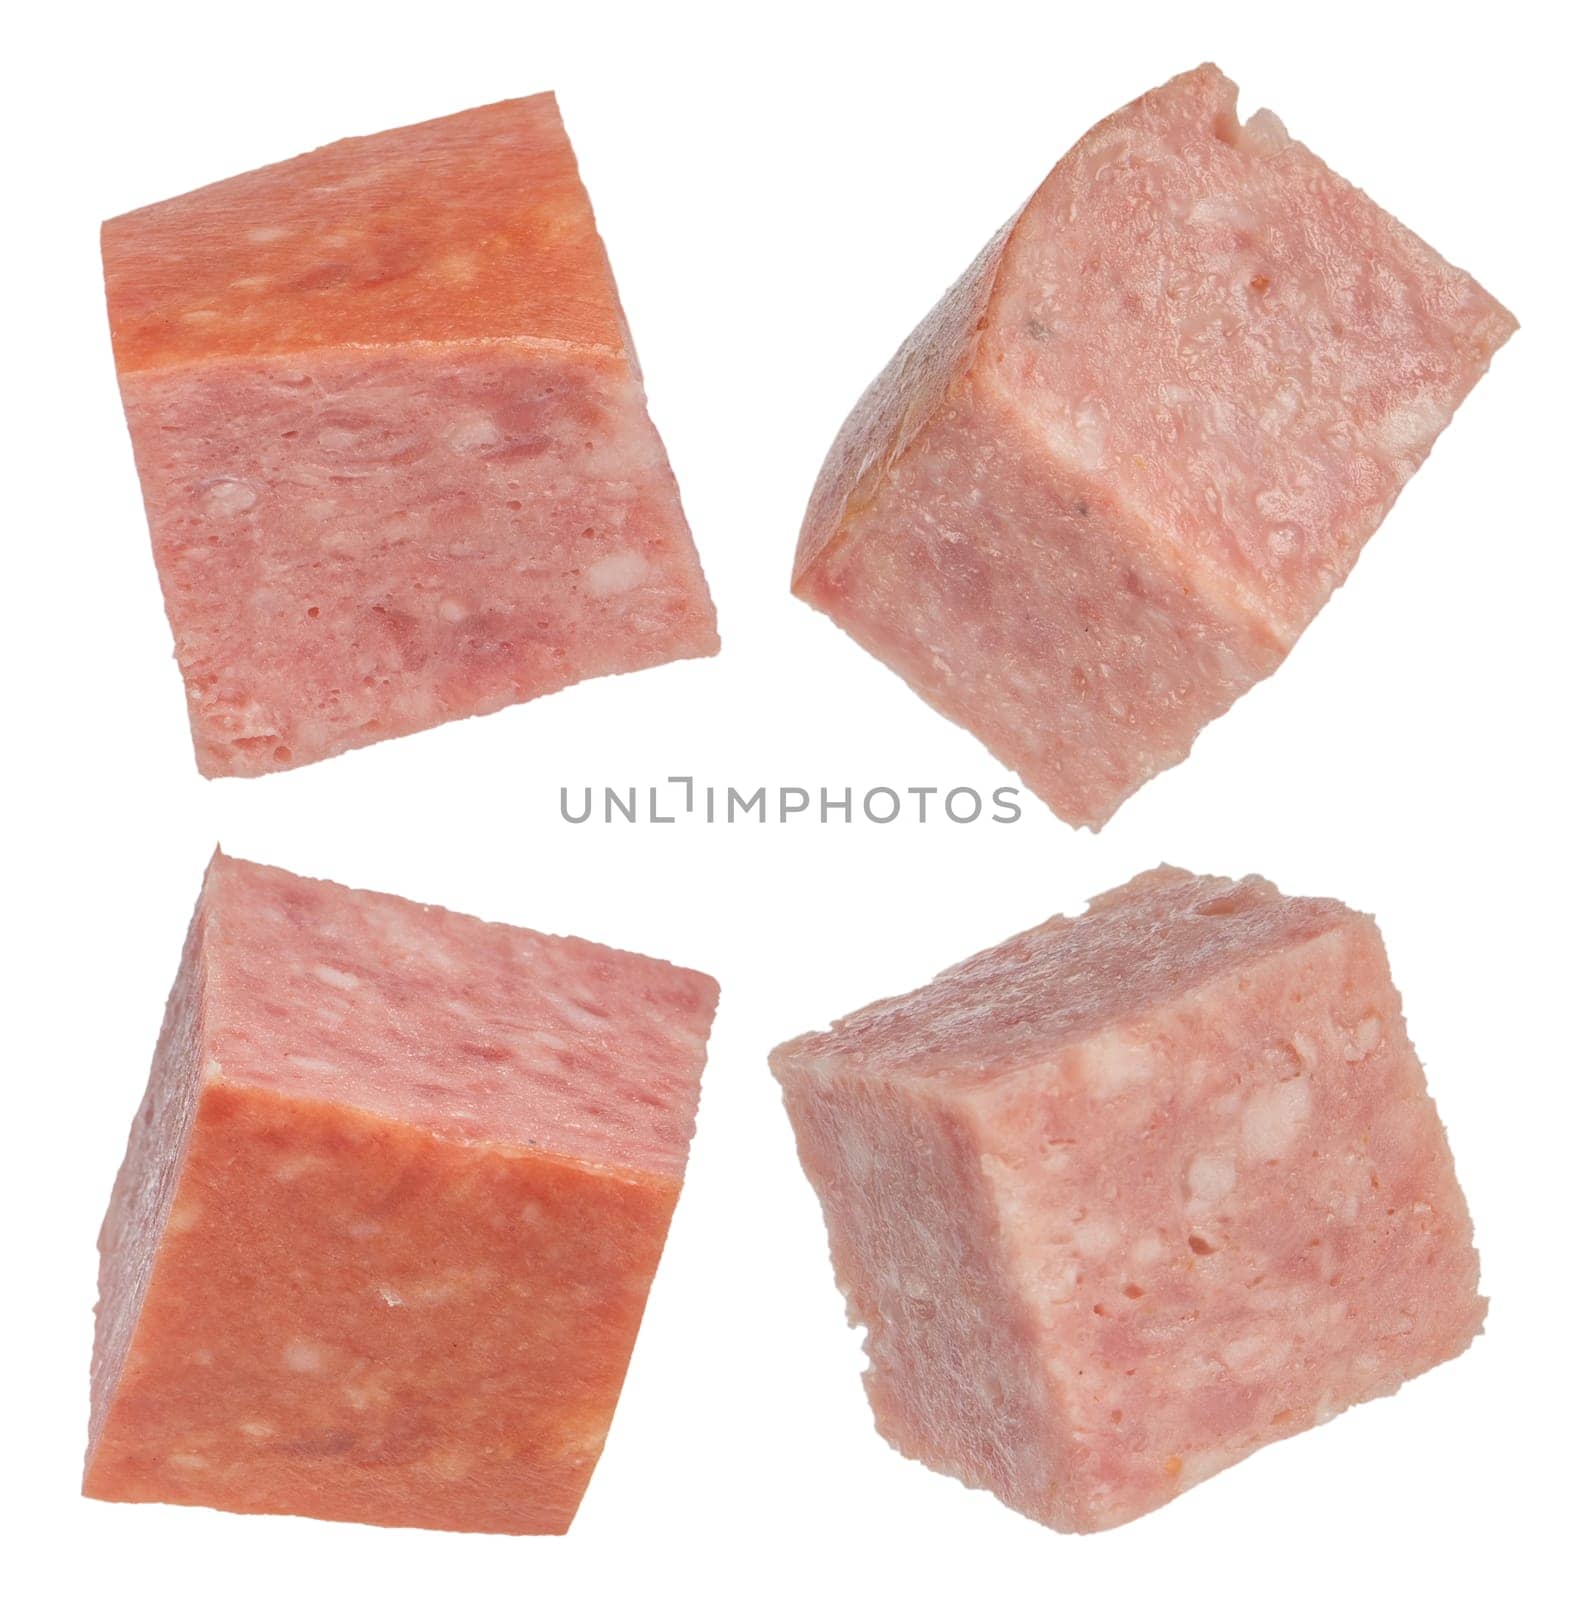 Smoked sausage isolate cut into squares. Salami sausage cubes on a white isolated background. For inserting into a design, project or product label creation. by SERSOL